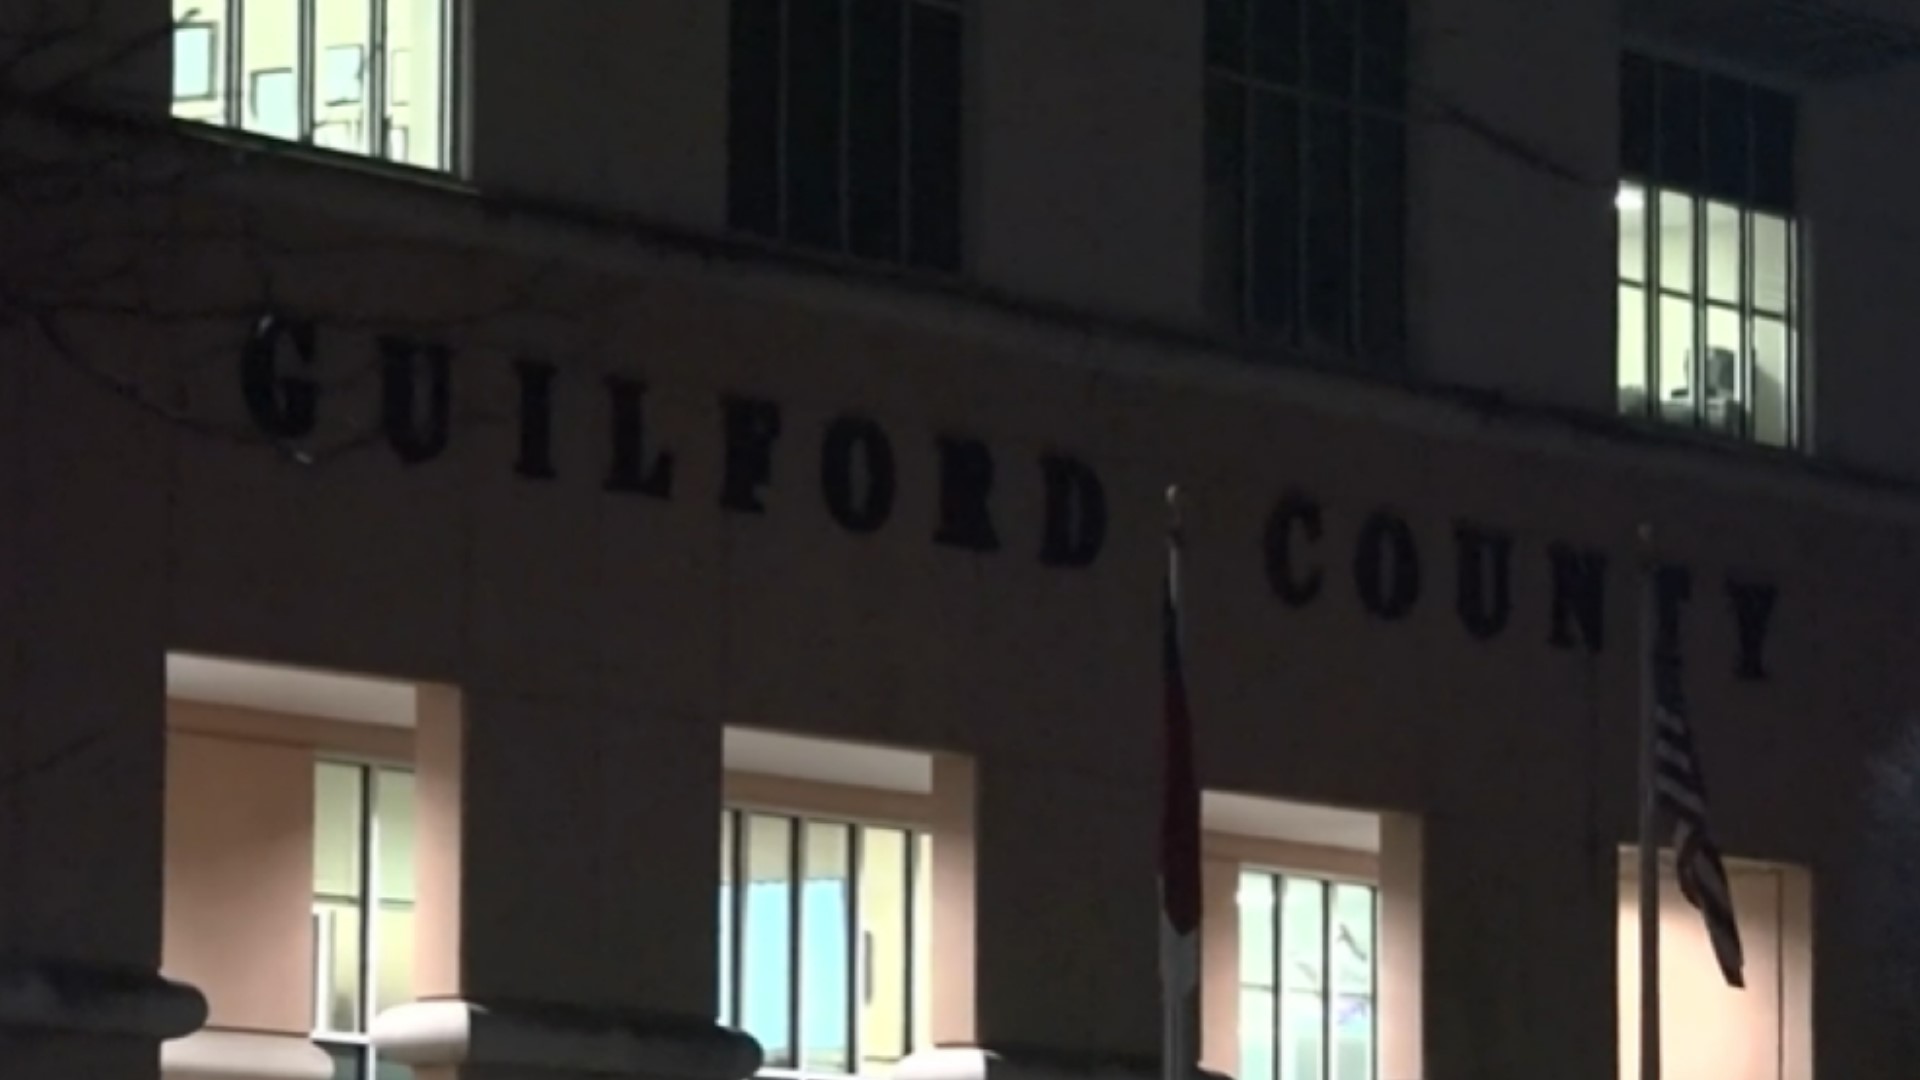 Guilford County DSS doesn’t have enough beds for kids with higher-level needs. Some teens had to temporarily move into an office building.